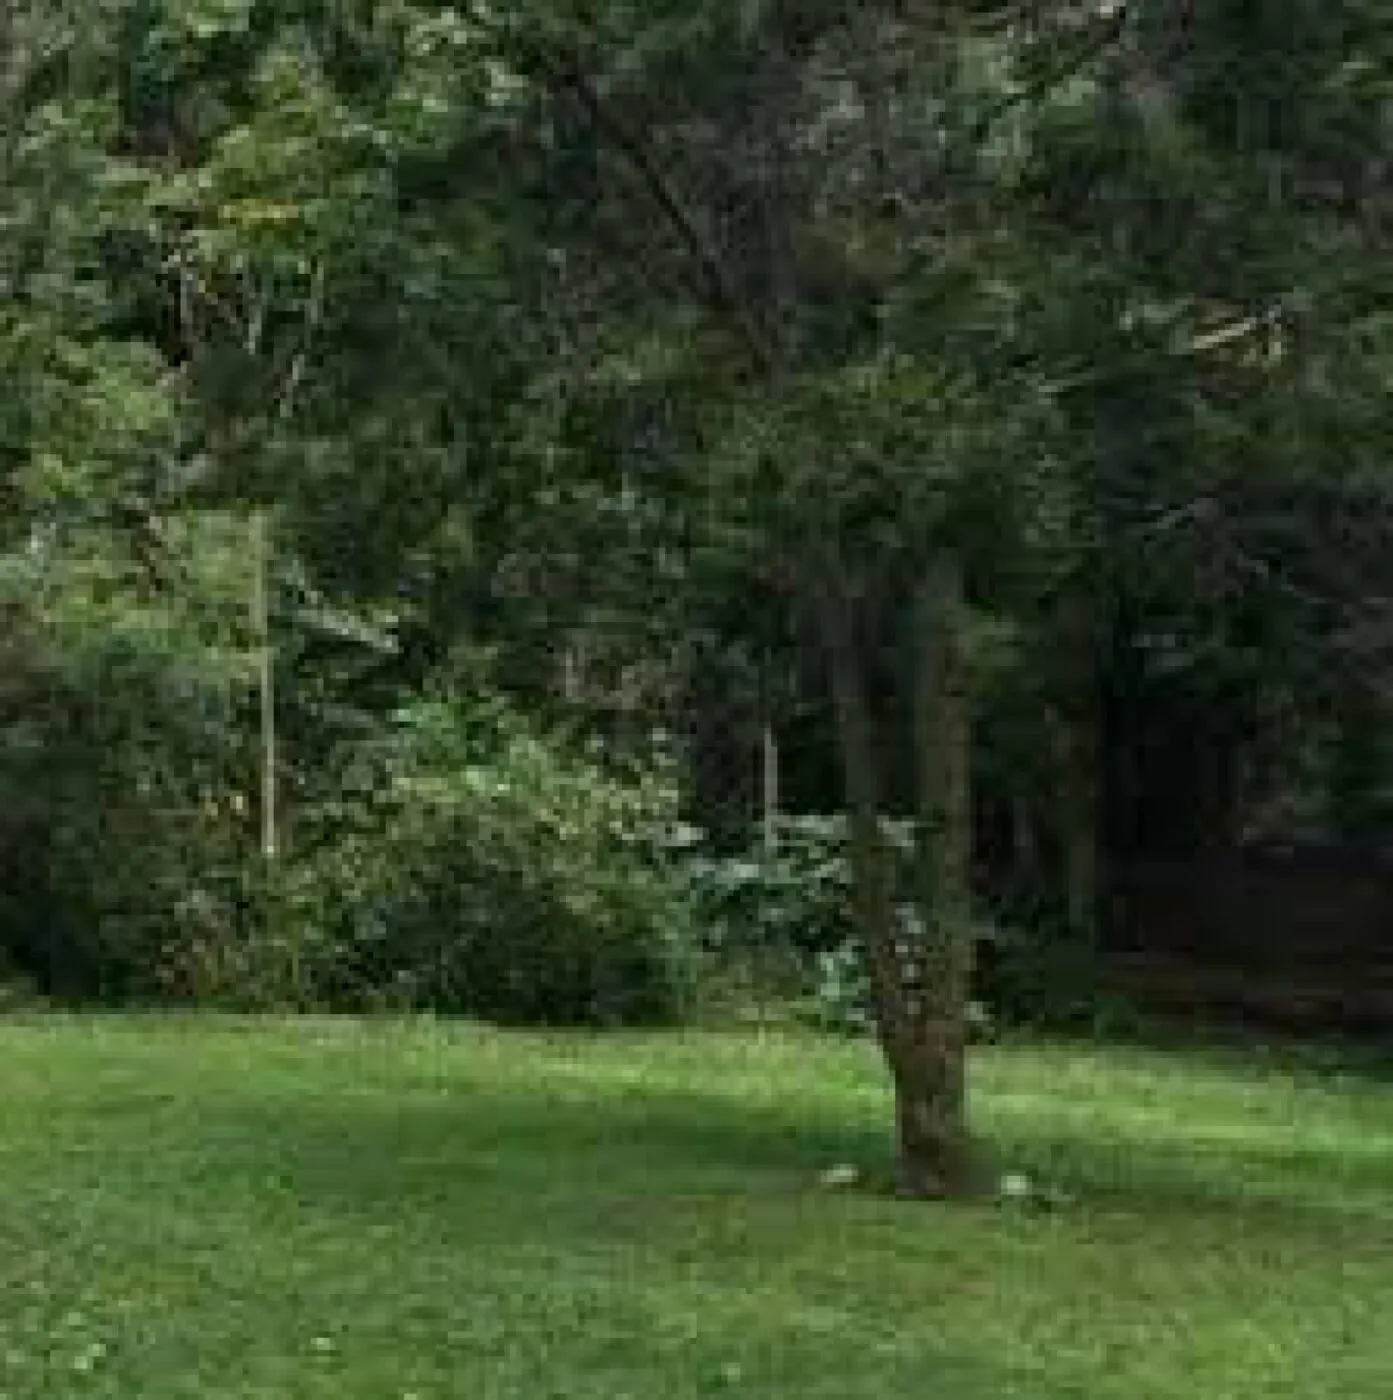 Land For Sale Real Estate-Land for sale in Karen Hardy 1/2 Acre @30M Ready Title Deed QUICK SALE Exclusive half acre 0.5🔥 9